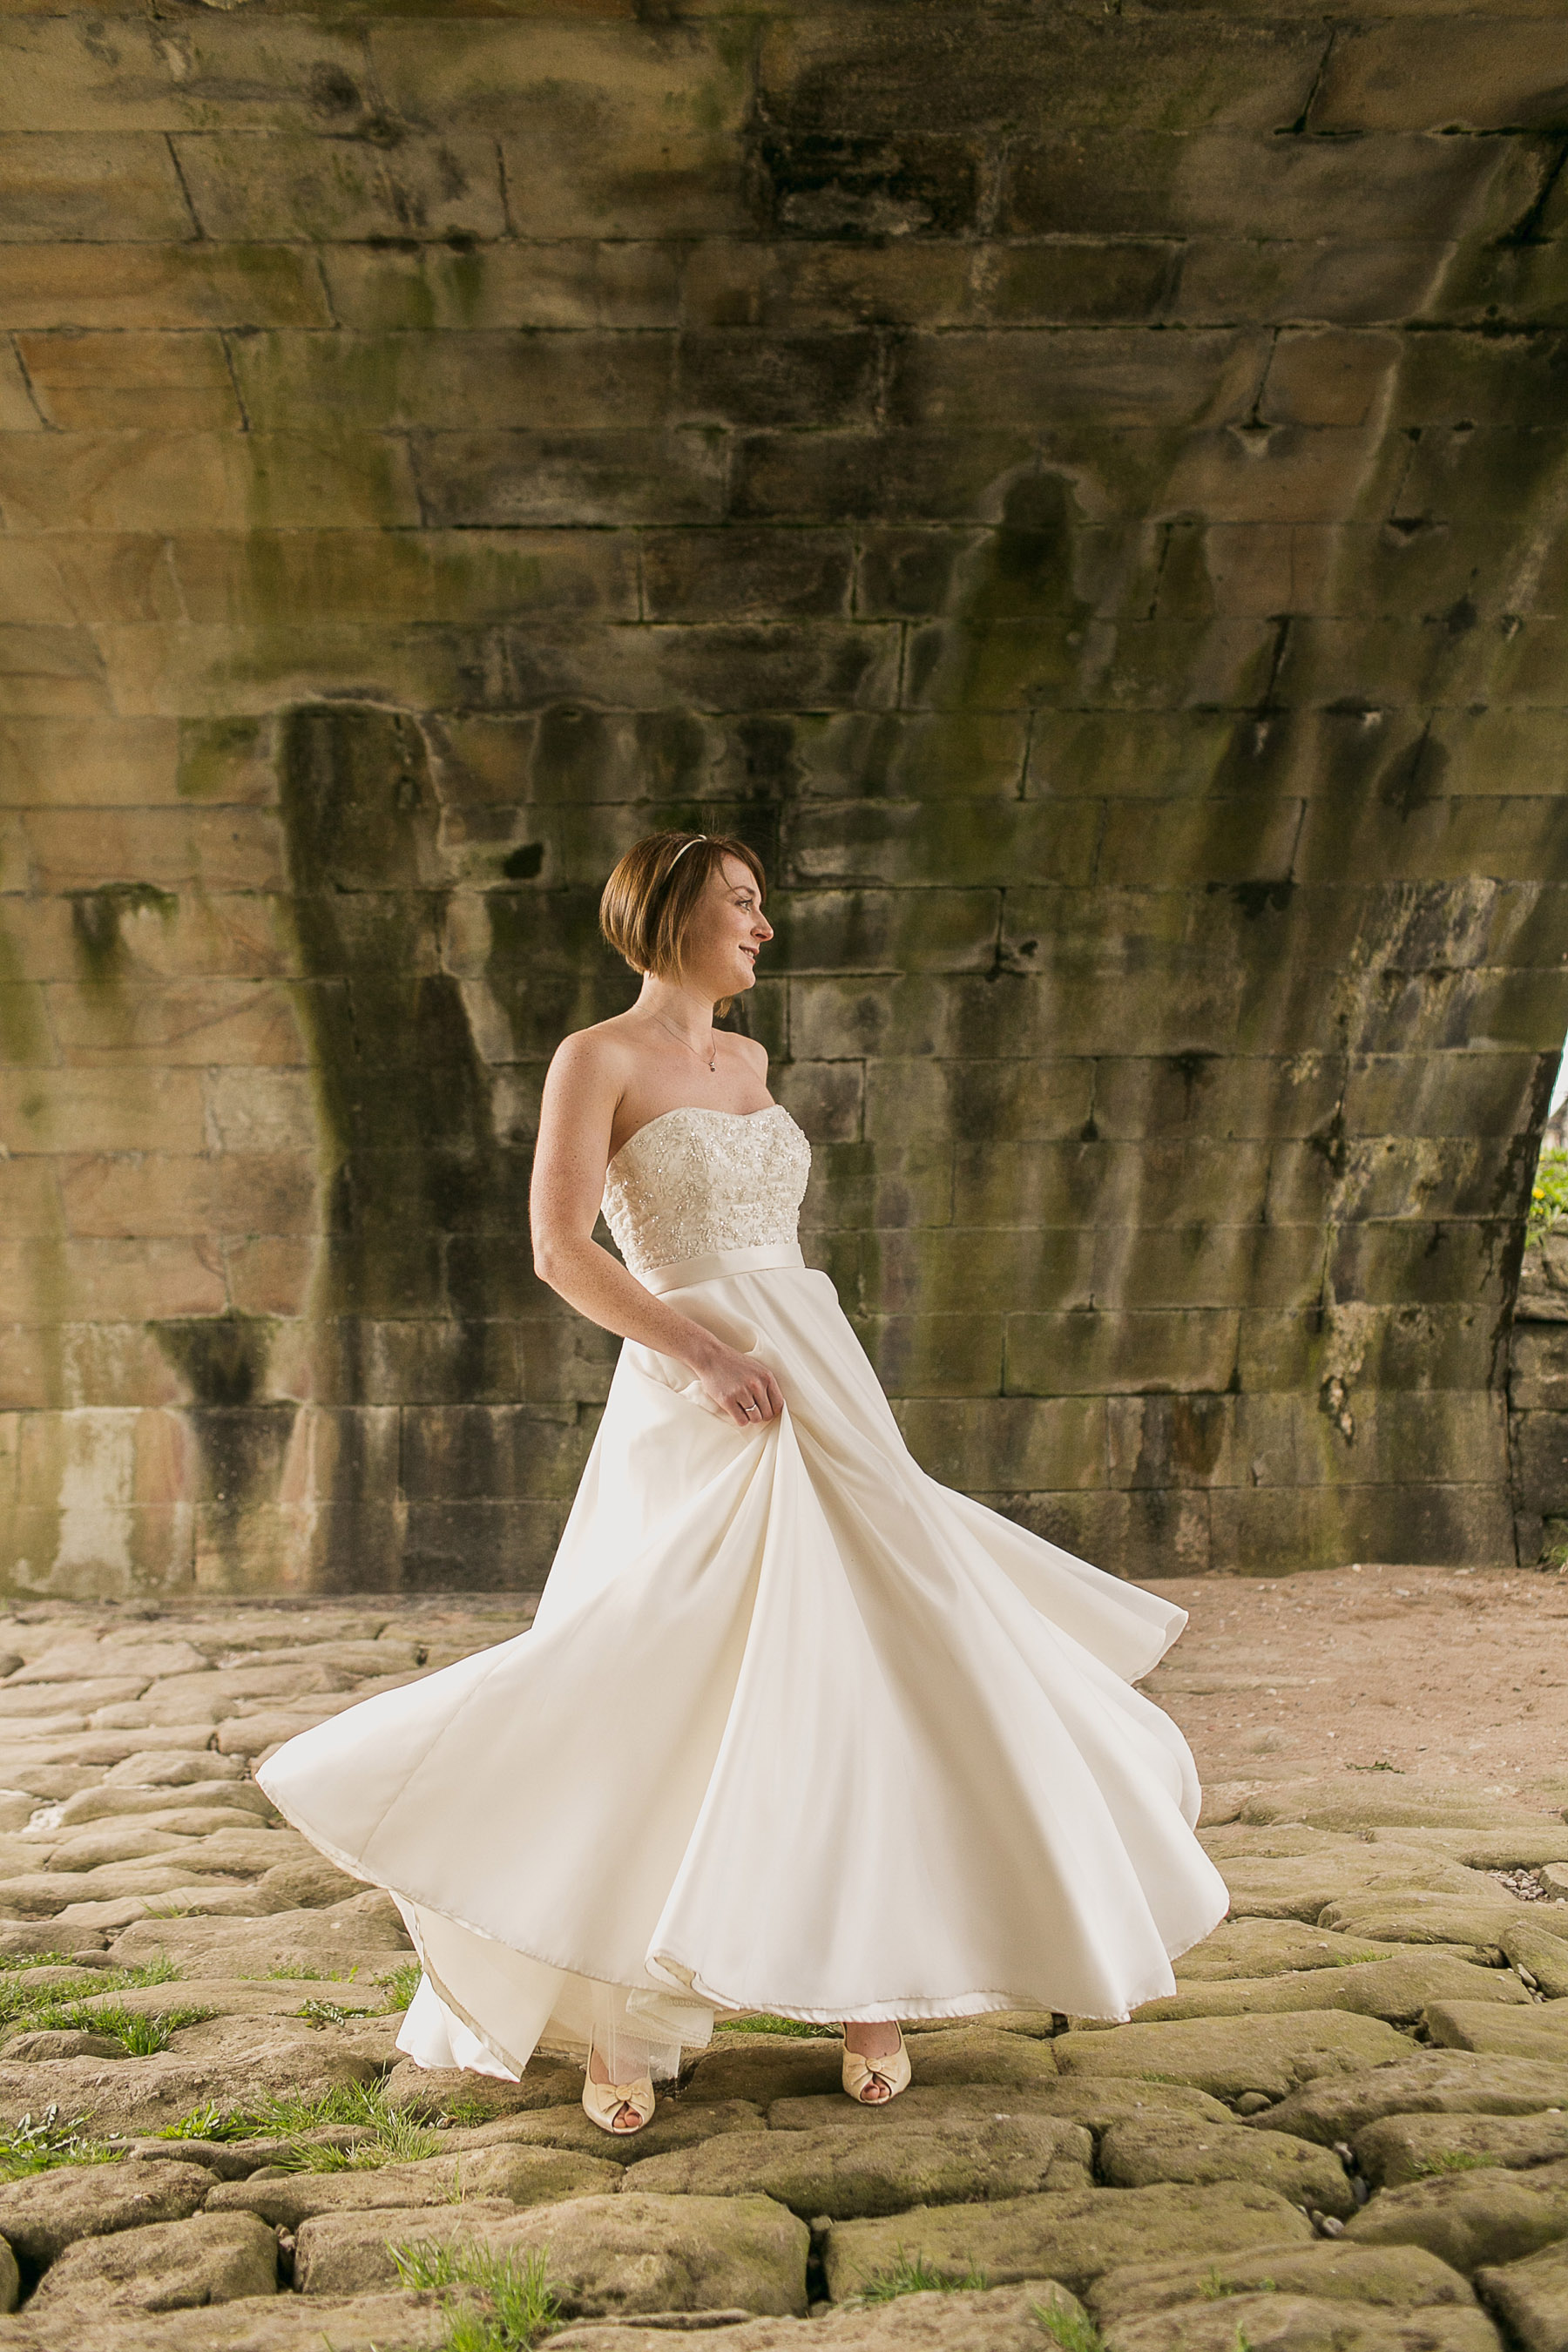 Rachel + Andrew's 100% DIY wedding at The Red Lion at Burnsall near Bolton Abbey